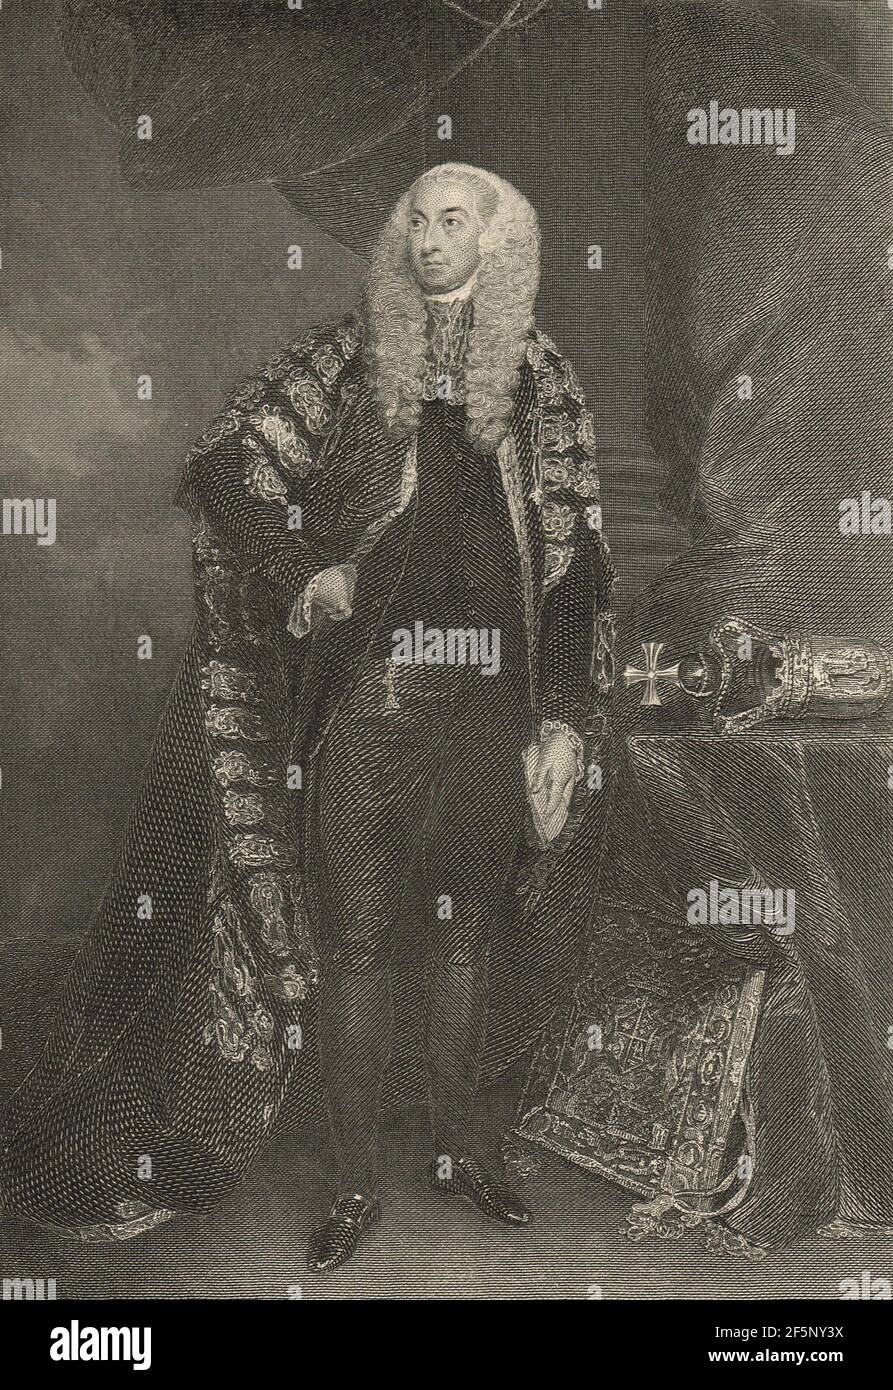 John FitzGibbon, 1st Earl of Clare, Lord Chancellor of Ireland during the Irish Rebellion of 1798 Stockfoto